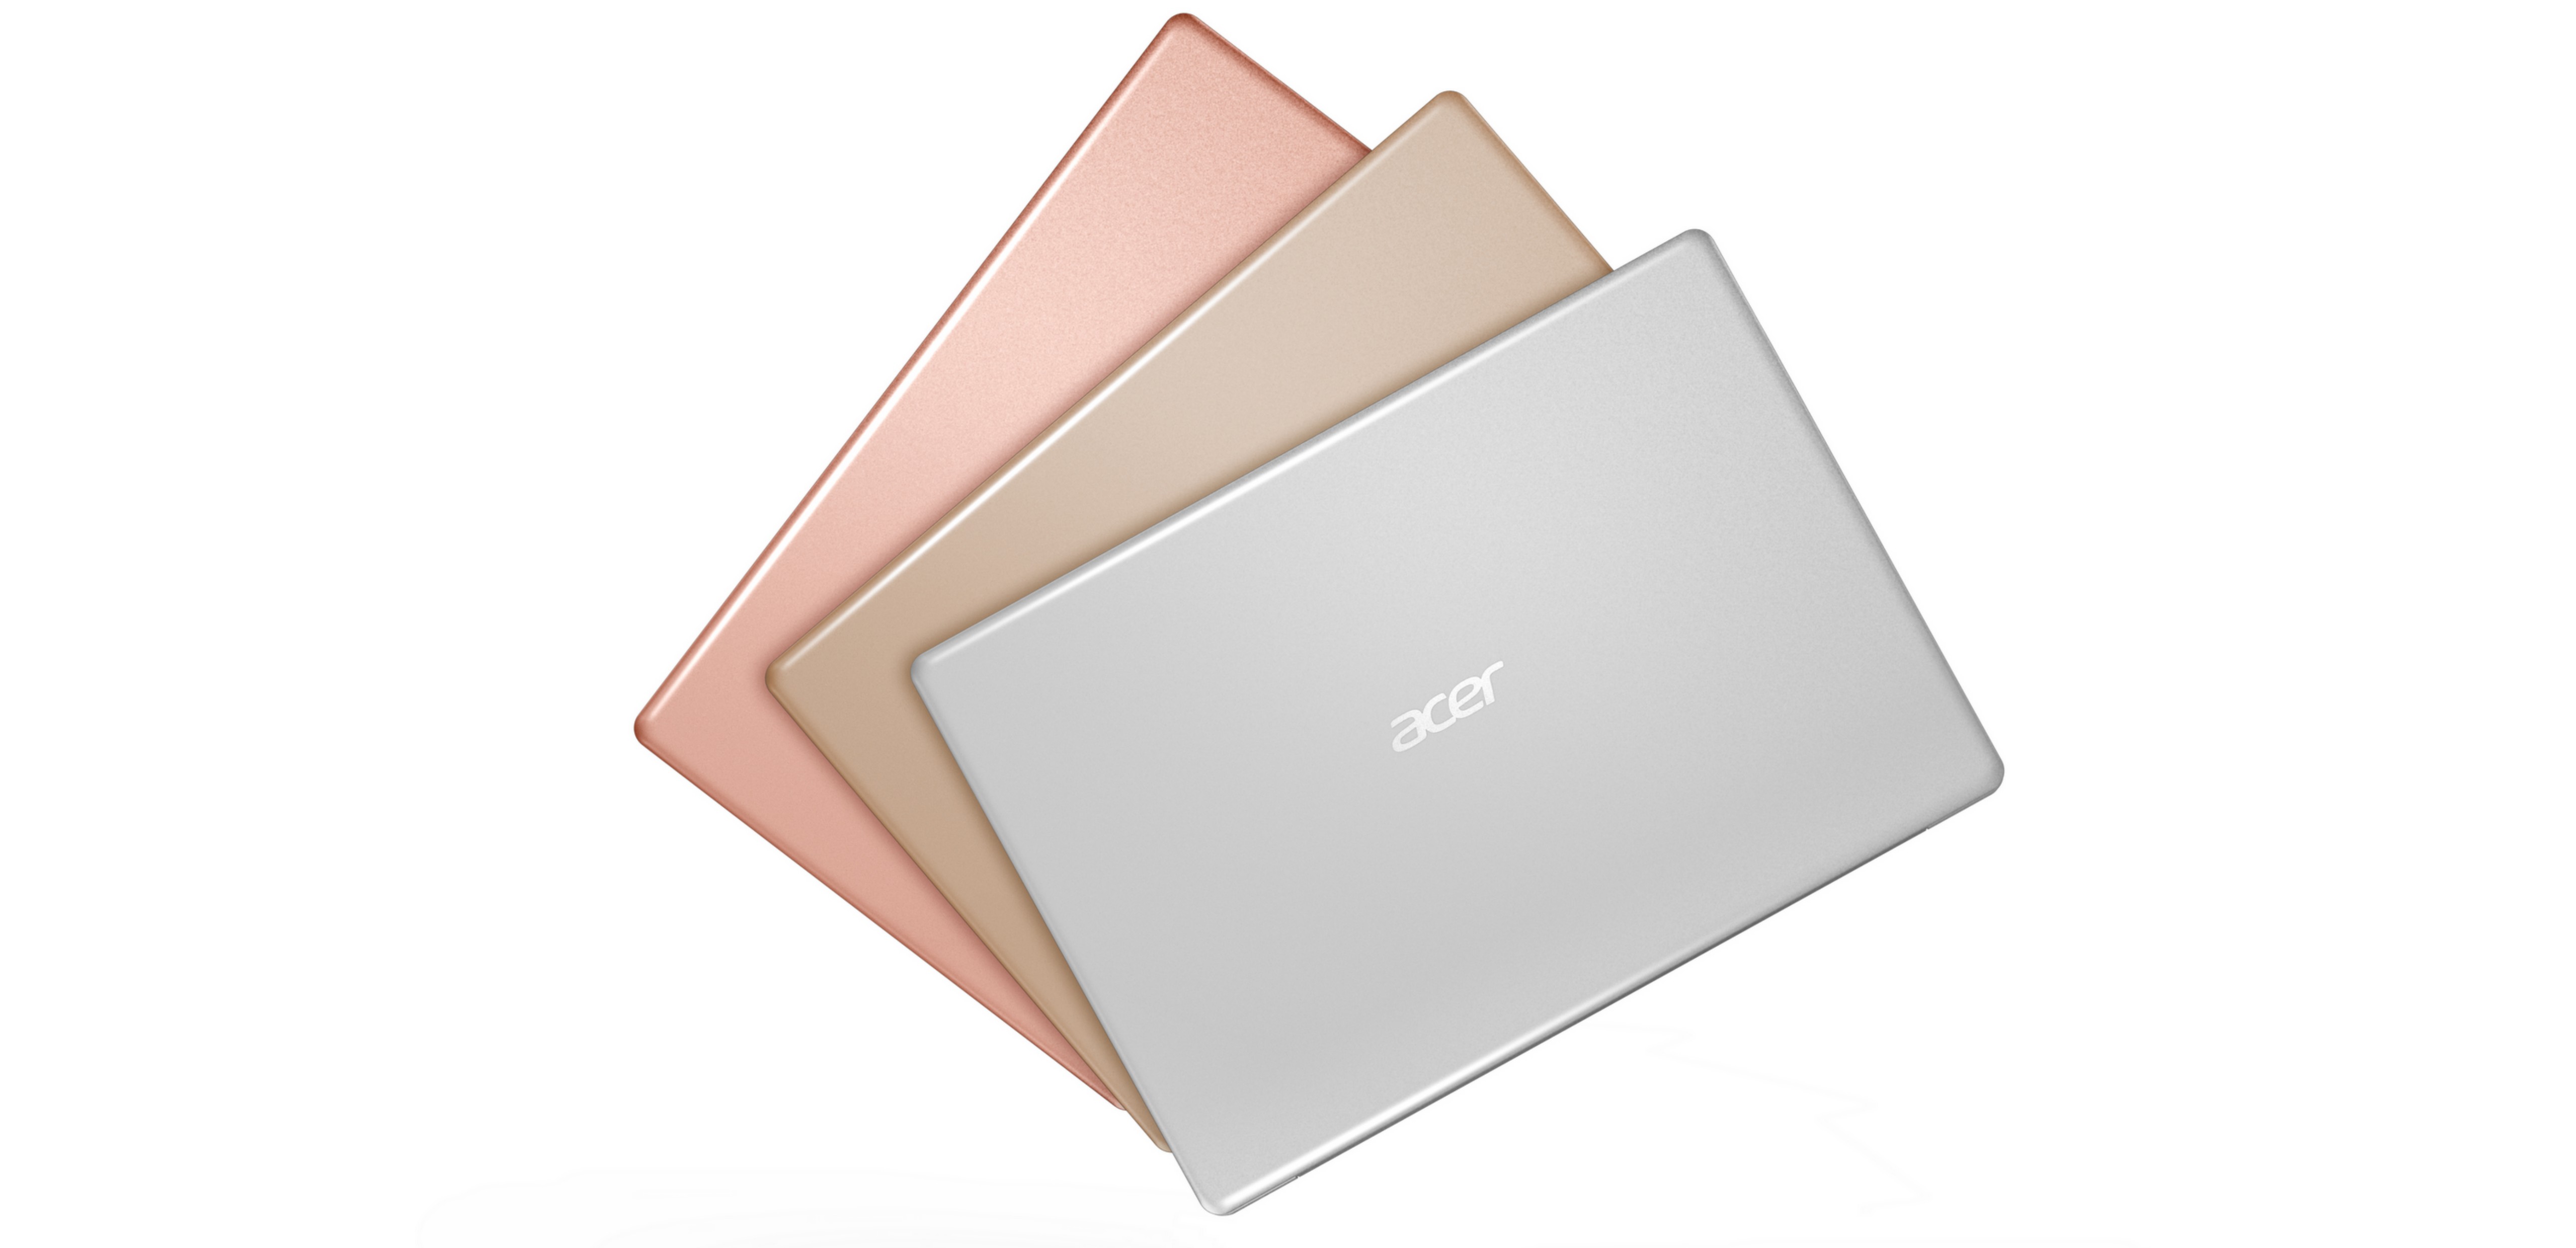 Acer announces new notebooks, desktops, and 2-in-1s powered by Windows 10